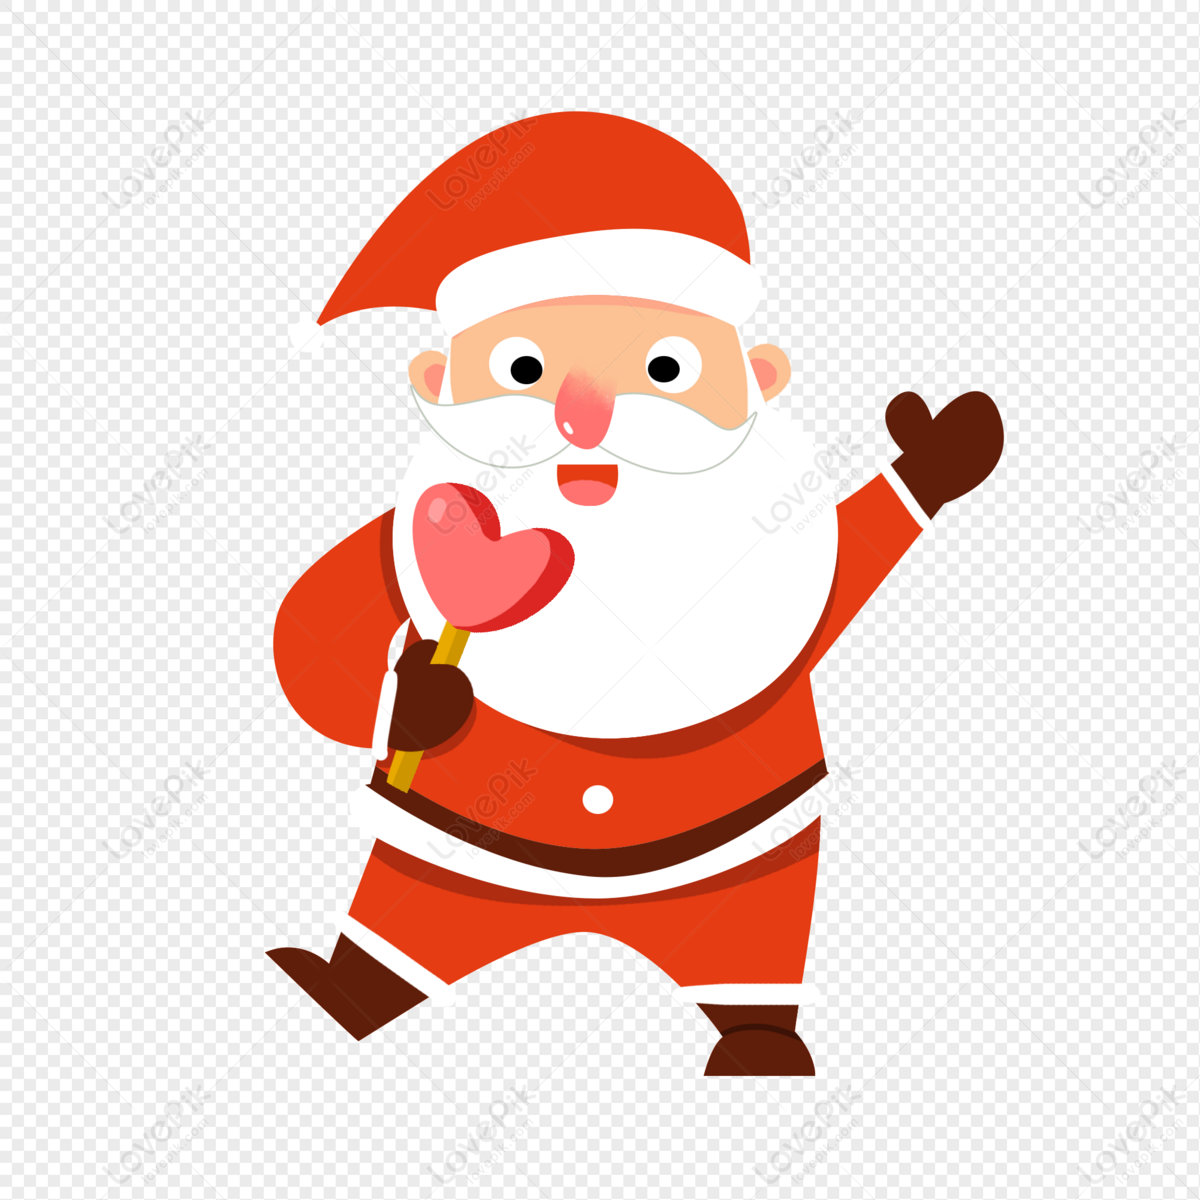 Santa Claus Cartoon Image PNG Transparent And Clipart Image For Free  Download - Lovepik | 401646986